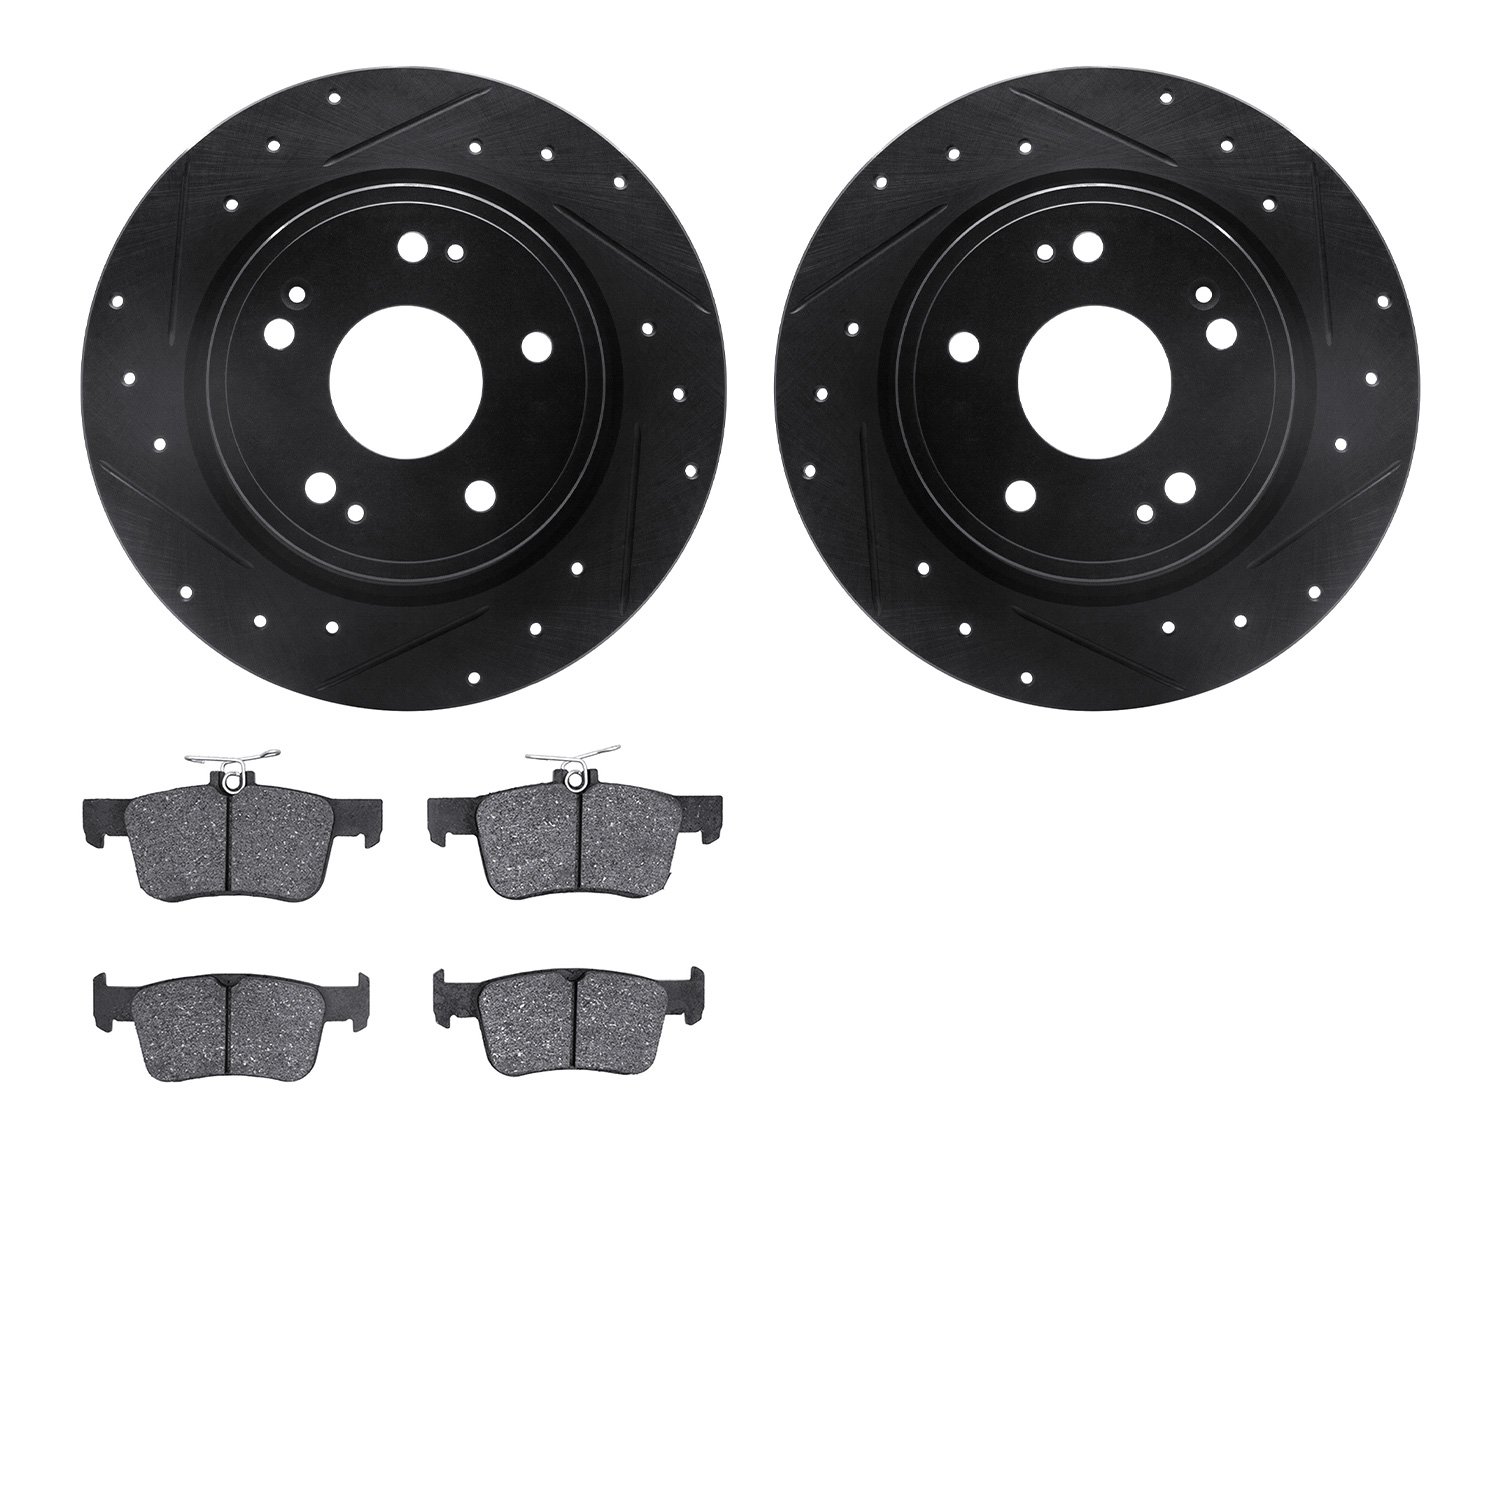 8302-59114 Drilled/Slotted Brake Rotors with 3000-Series Ceramic Brake Pads Kit [Black], Fits Select Acura/Honda, Position: Rear